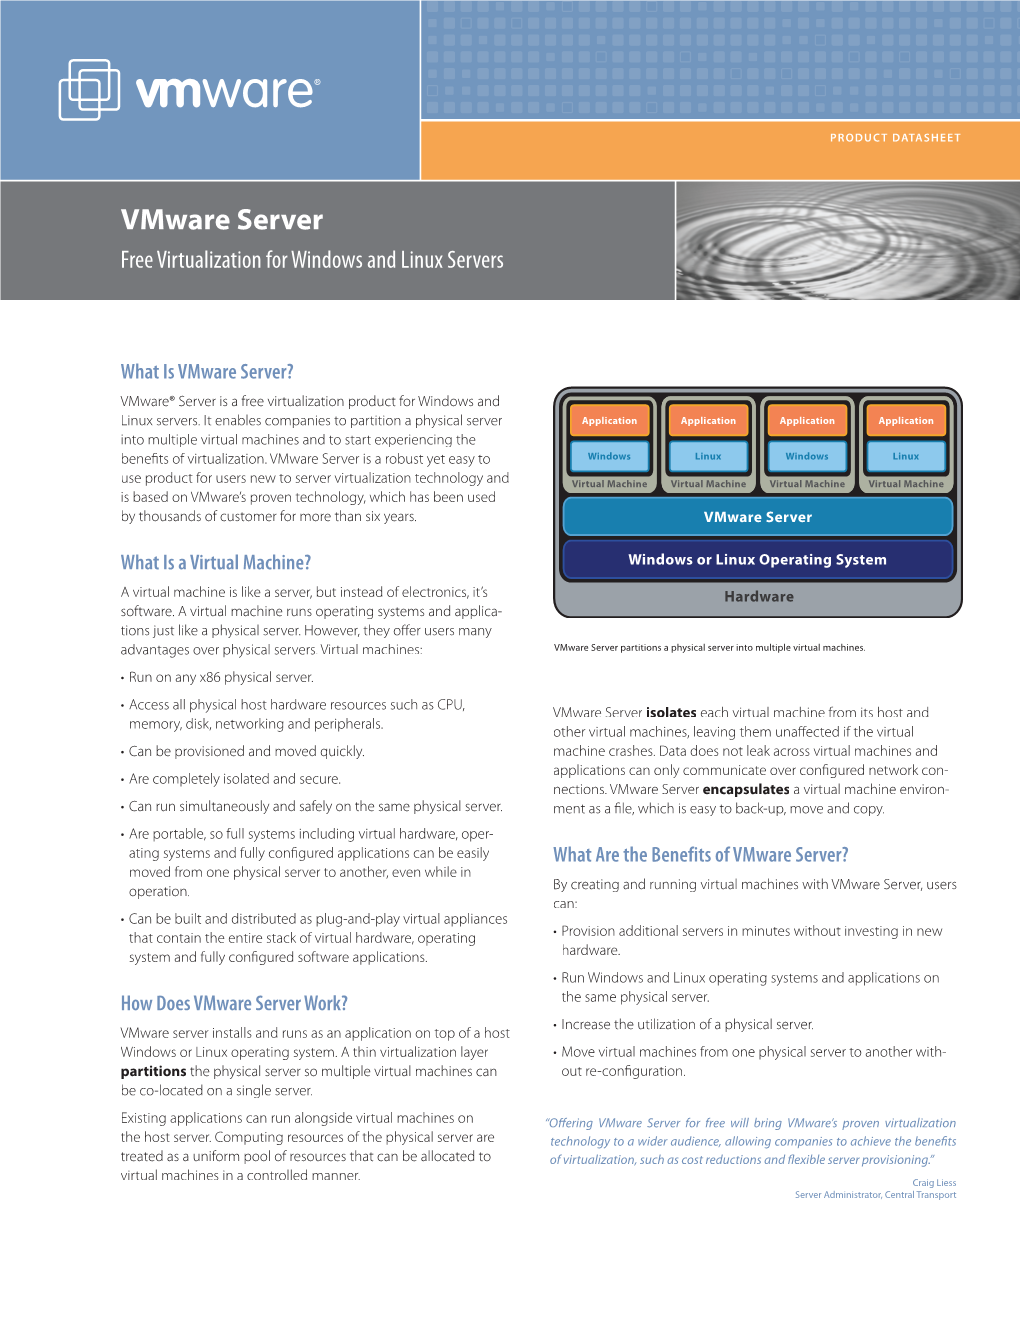 Vmware Server Free Virtualization for Windows and Linux Servers